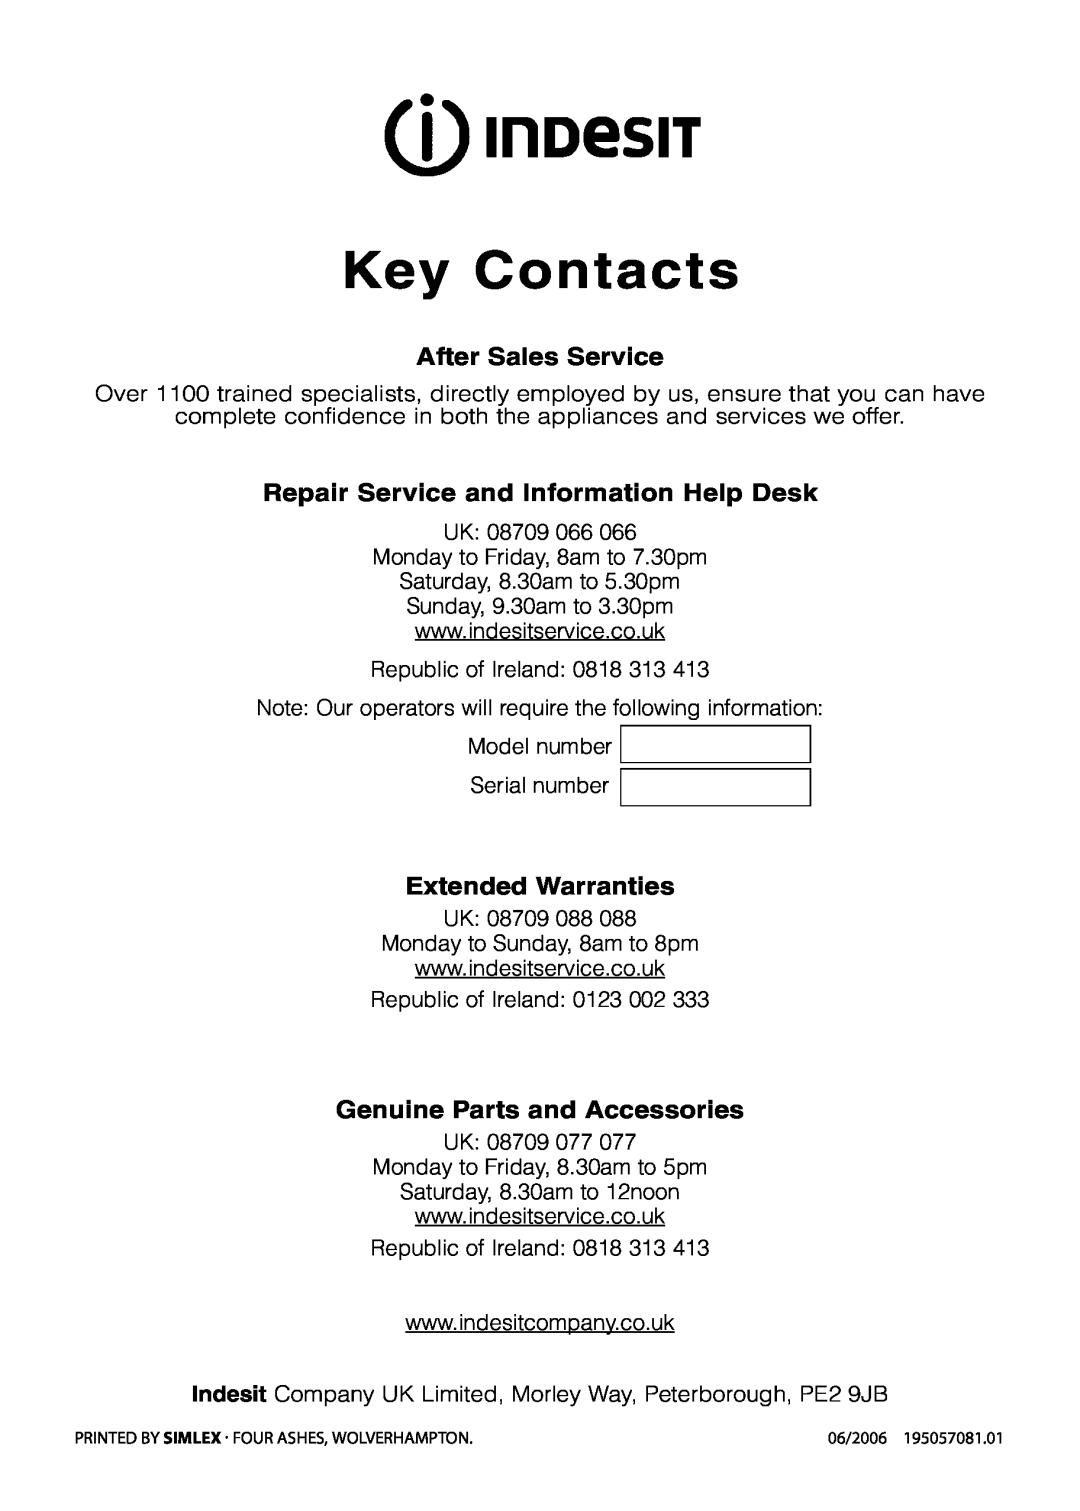 Indesit KT6G2M, KT6G2W Key Contacts, After Sales Service, Repair Service and Information Help Desk, Extended Warranties 